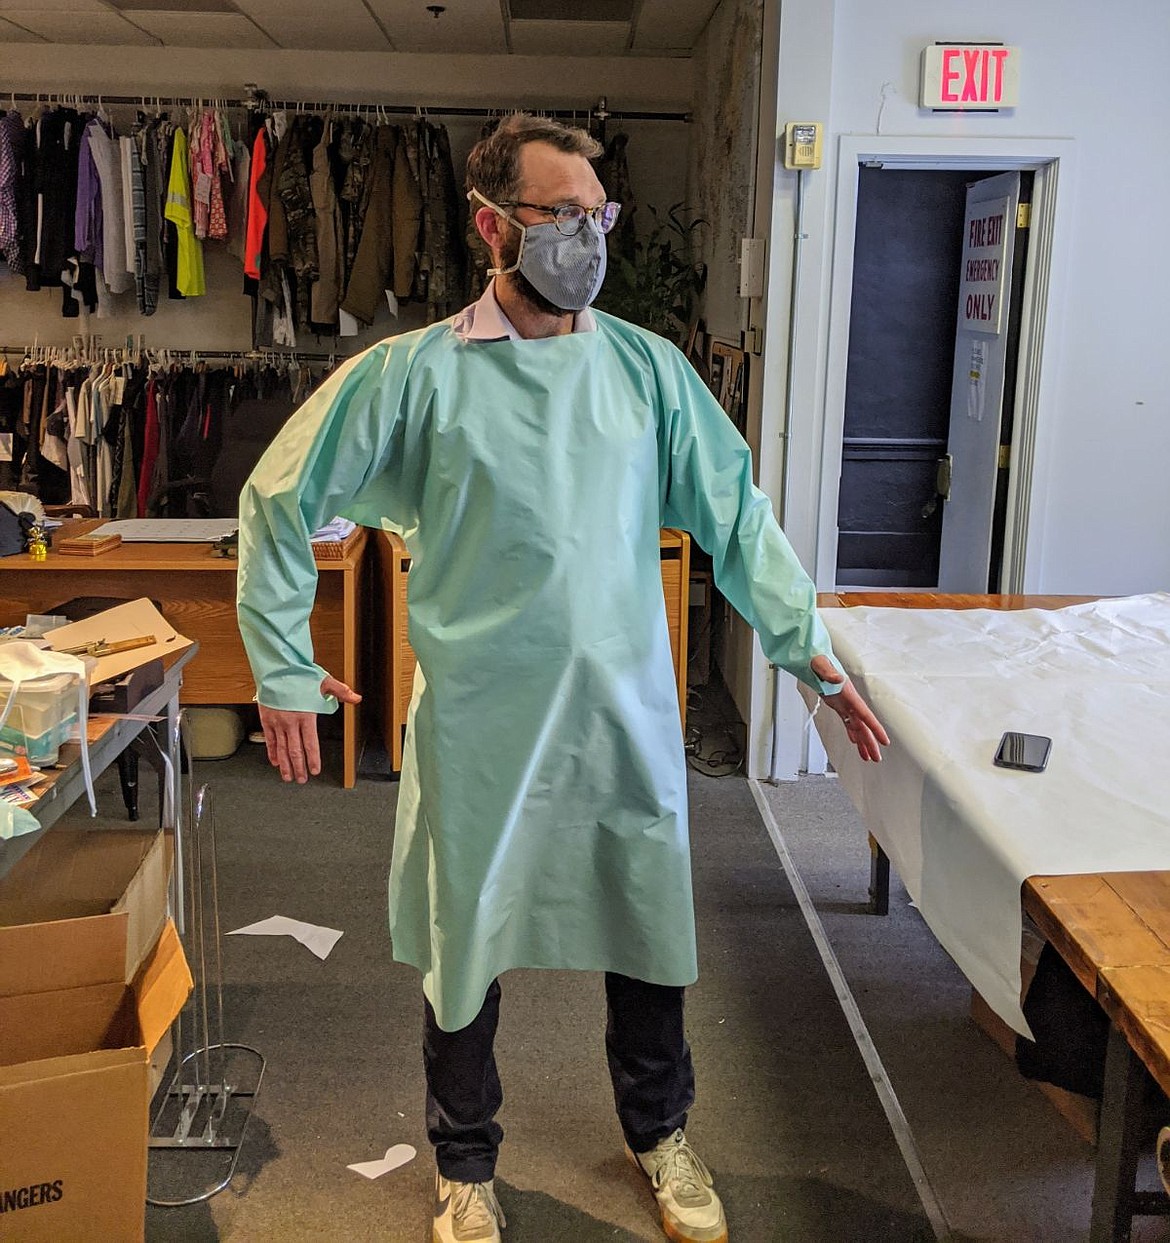 An employee at a FORLOH facility tries on a medical mask and gown made by the outdoor apparel company.